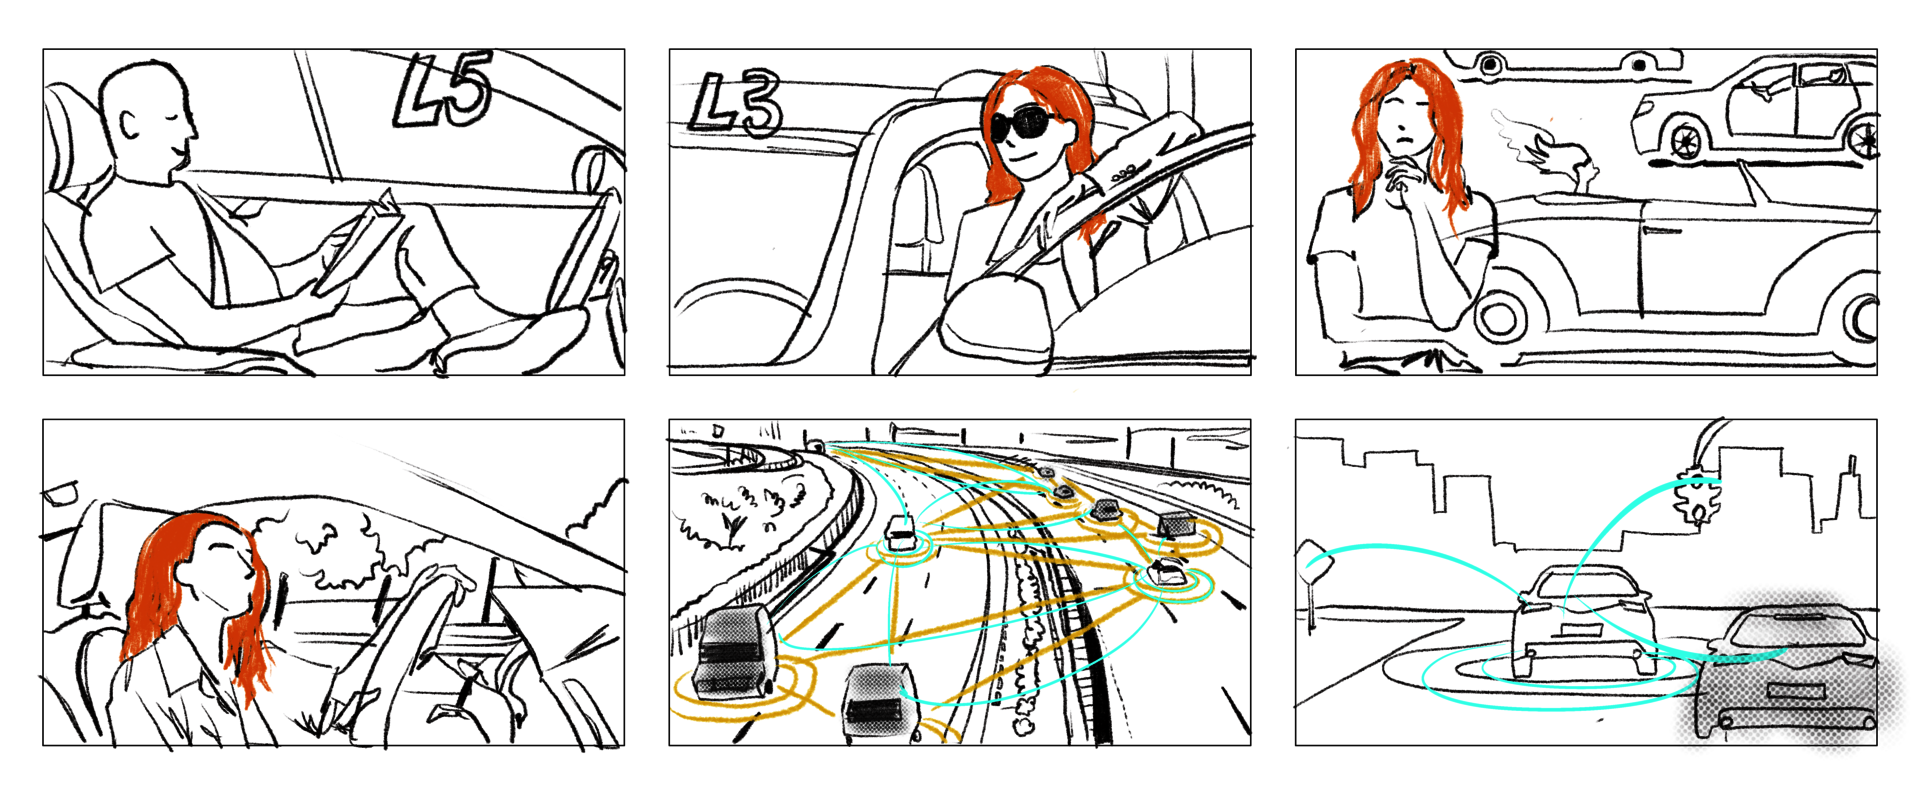 Our persona, Ava's storyboard shows her driving a traditional car when the cars around her are fully autonomous. 